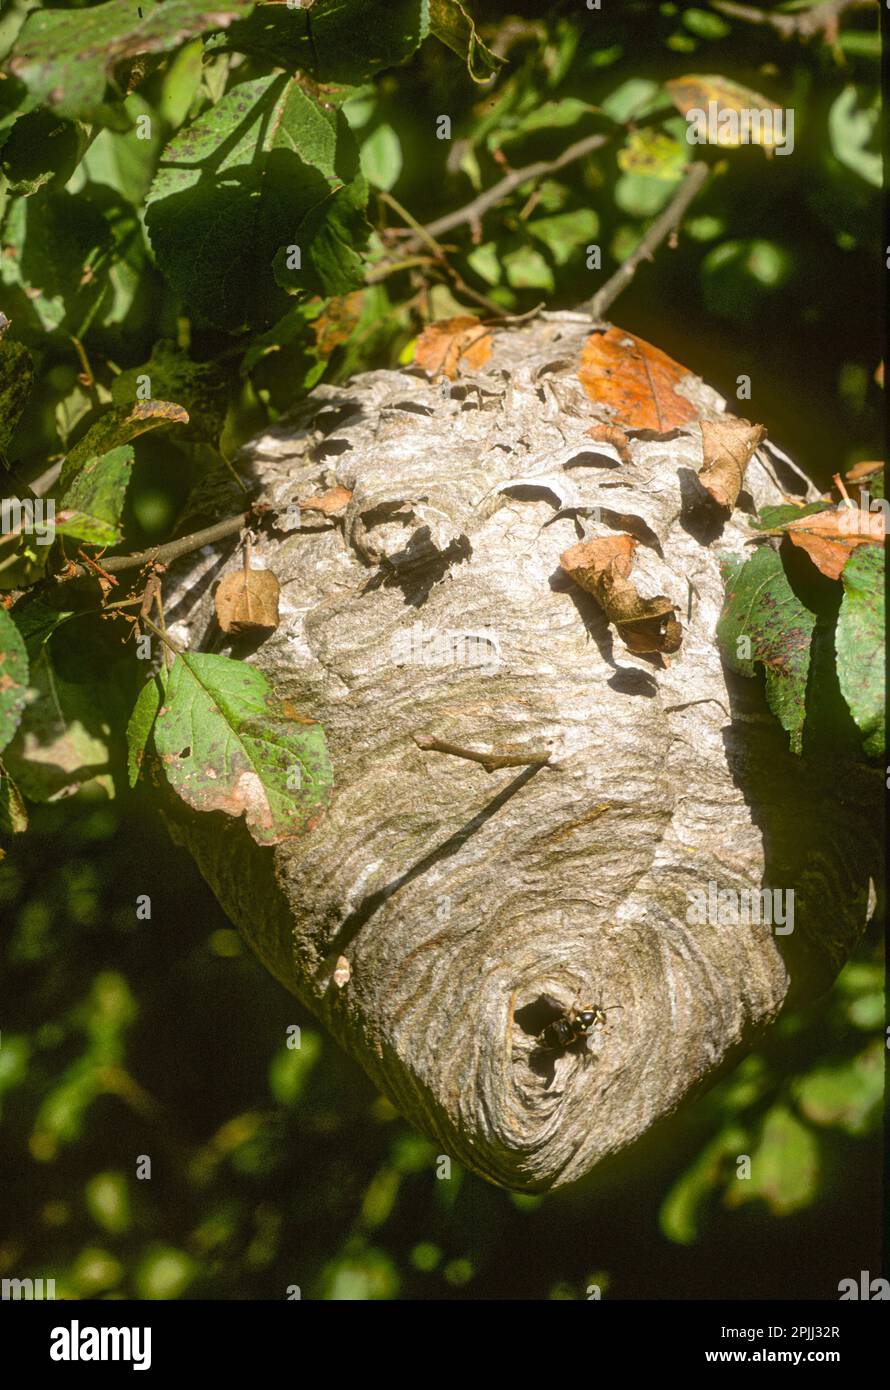 A white faced wasp nest Stock Photo